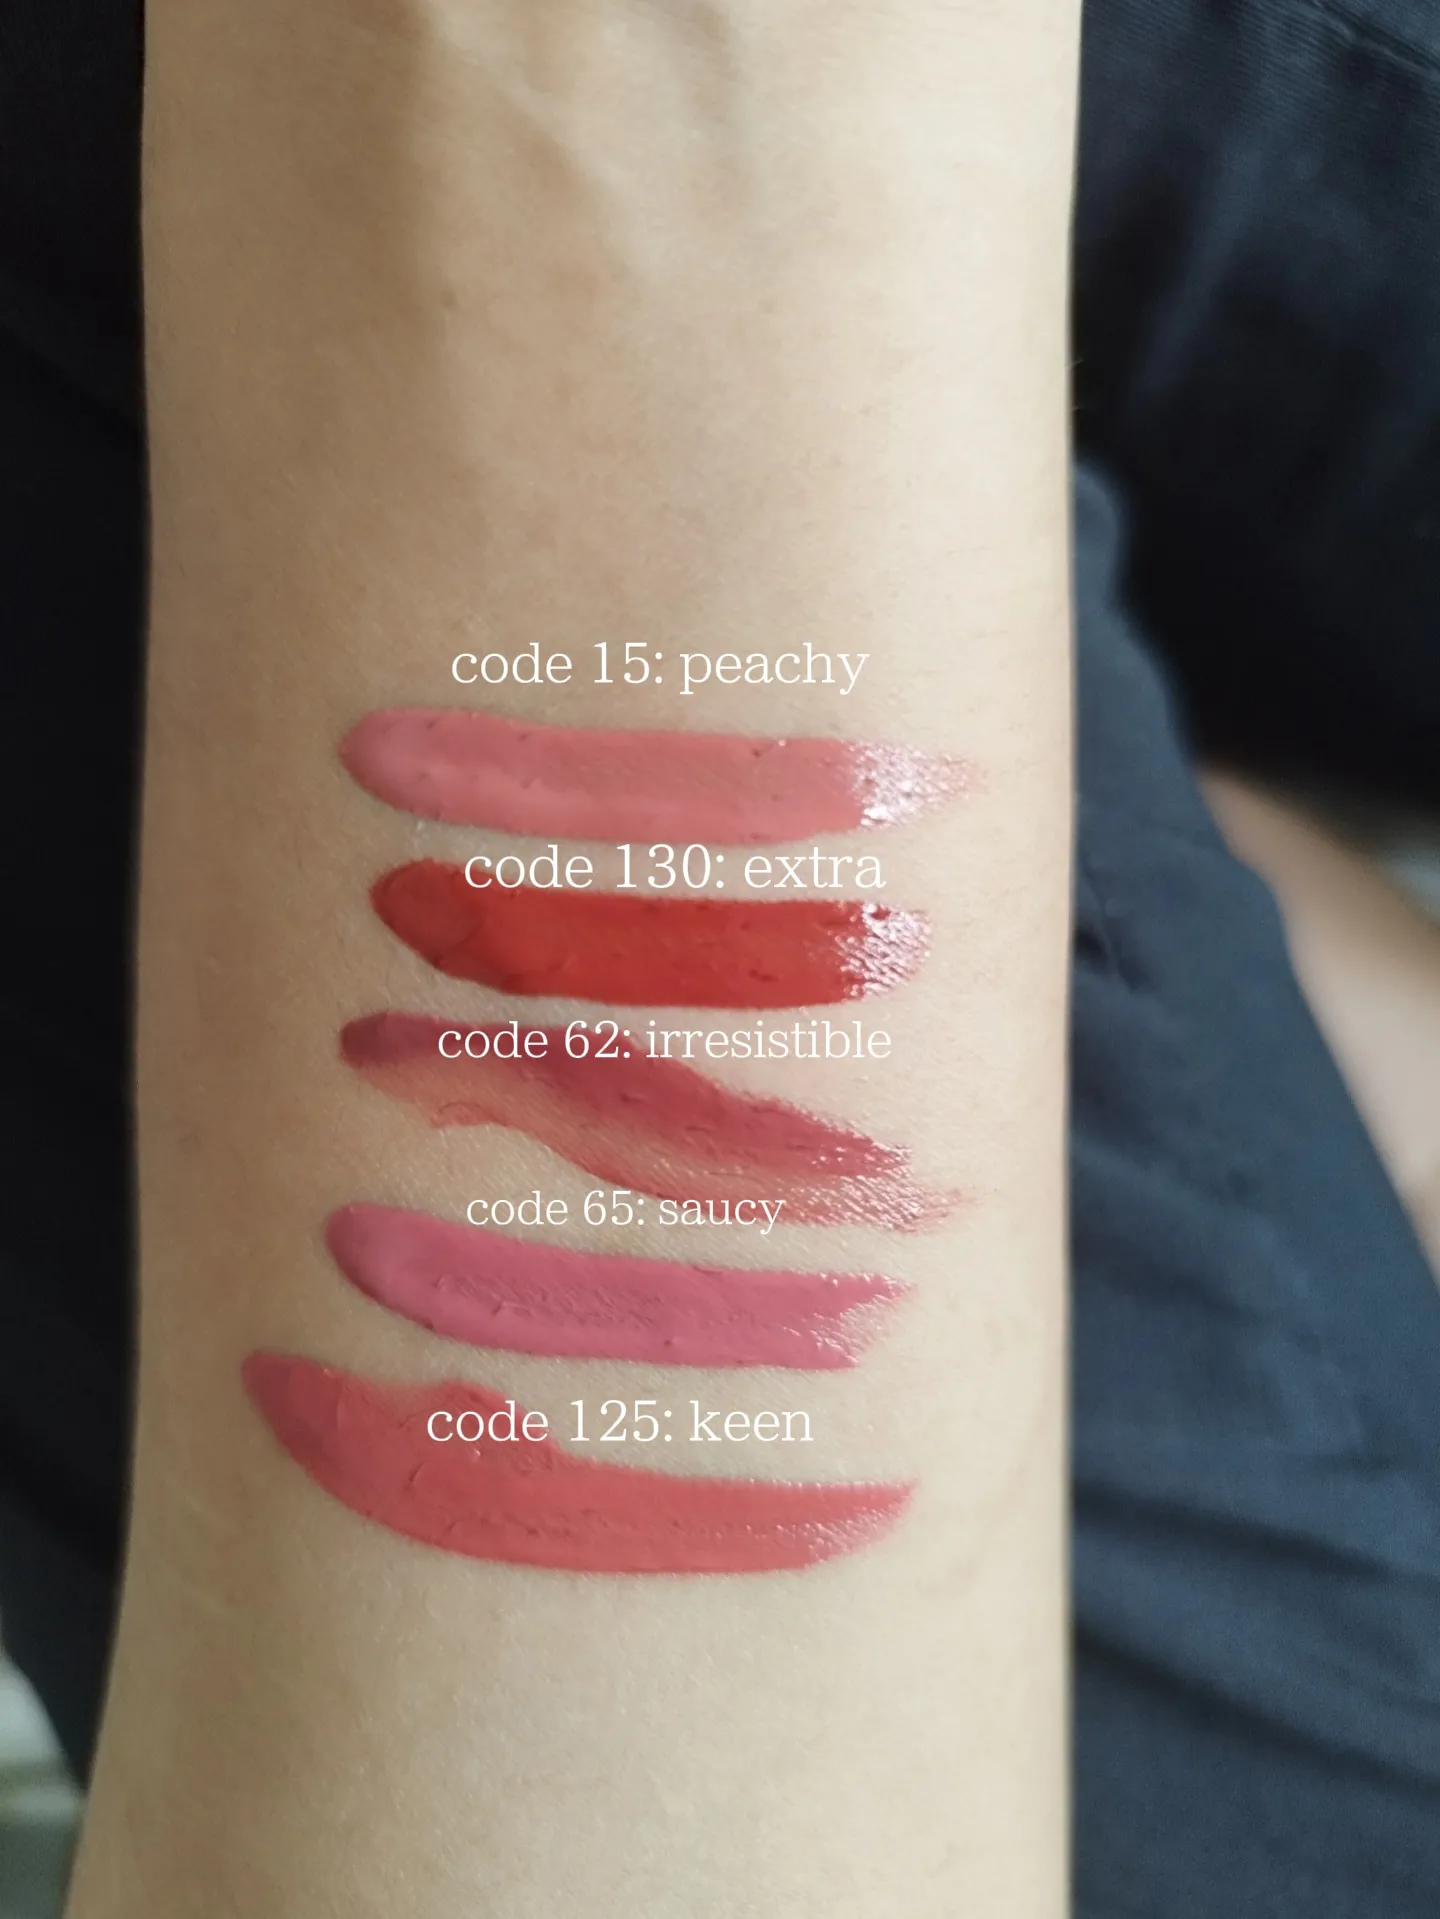 my favourite lipstick recommendation, Gallery posted by Naqieeeee_